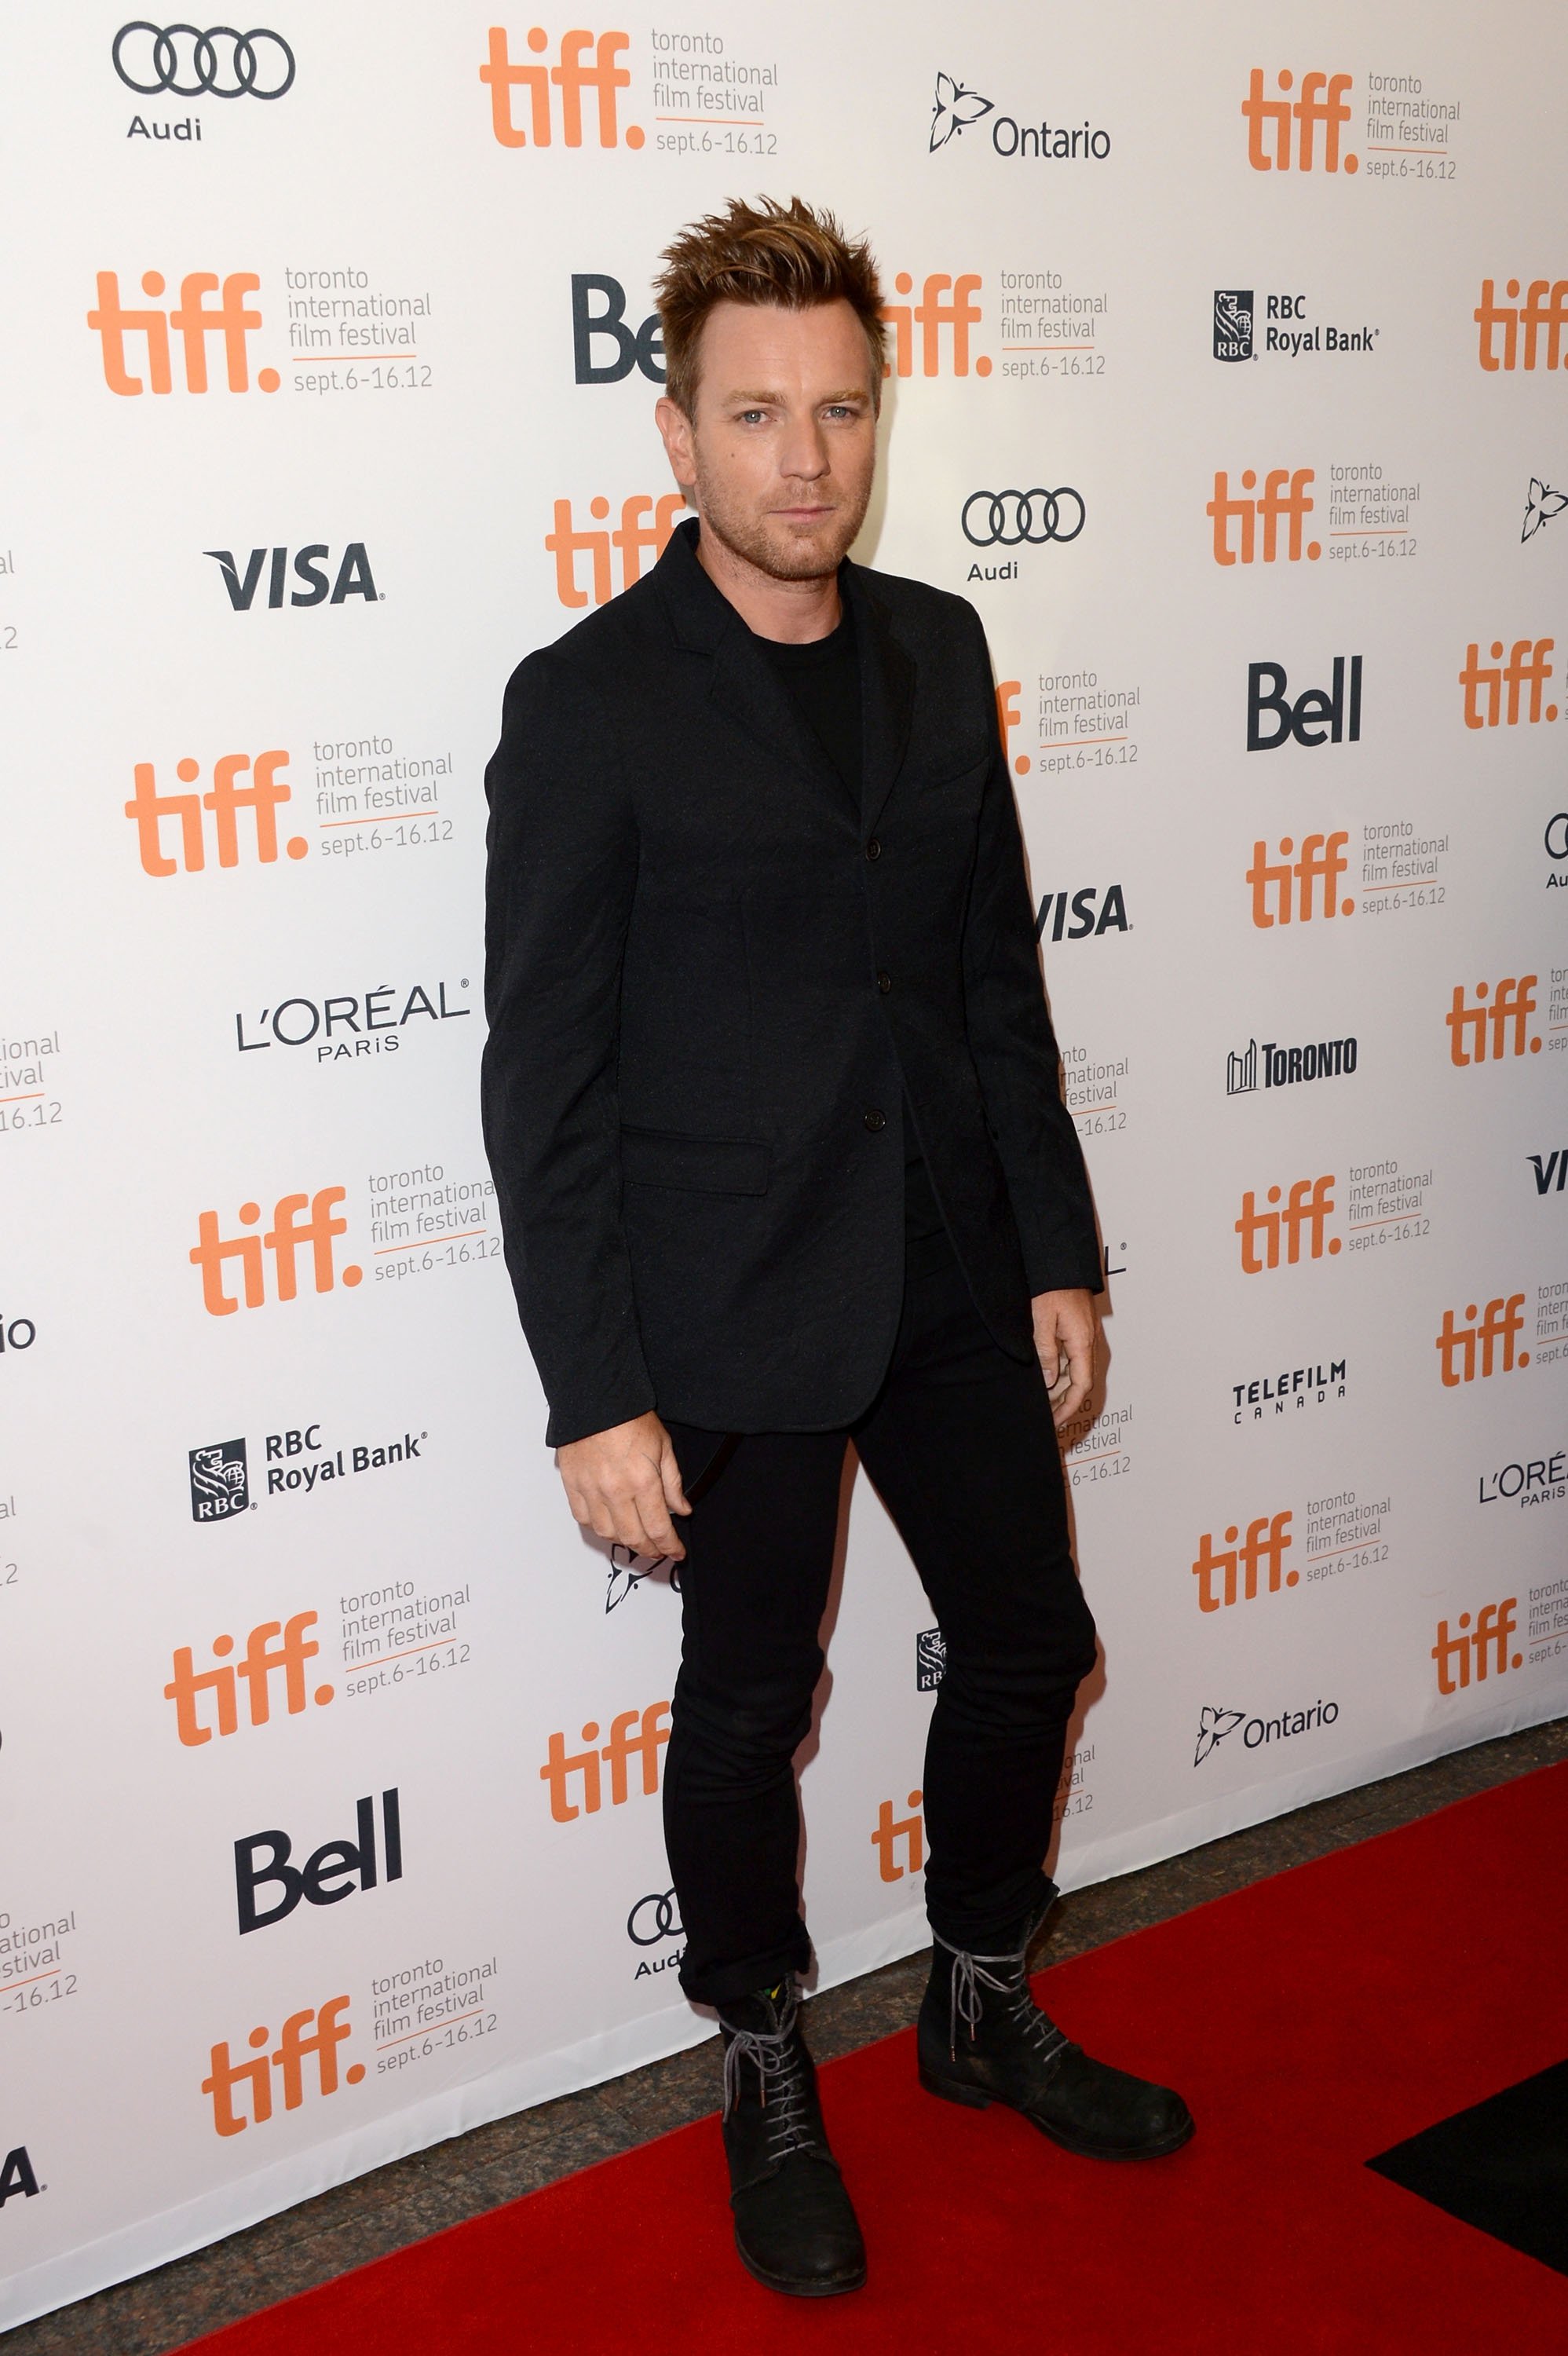 2012-09-09-TIFF-The-Impossible-Premiere-019.jpg